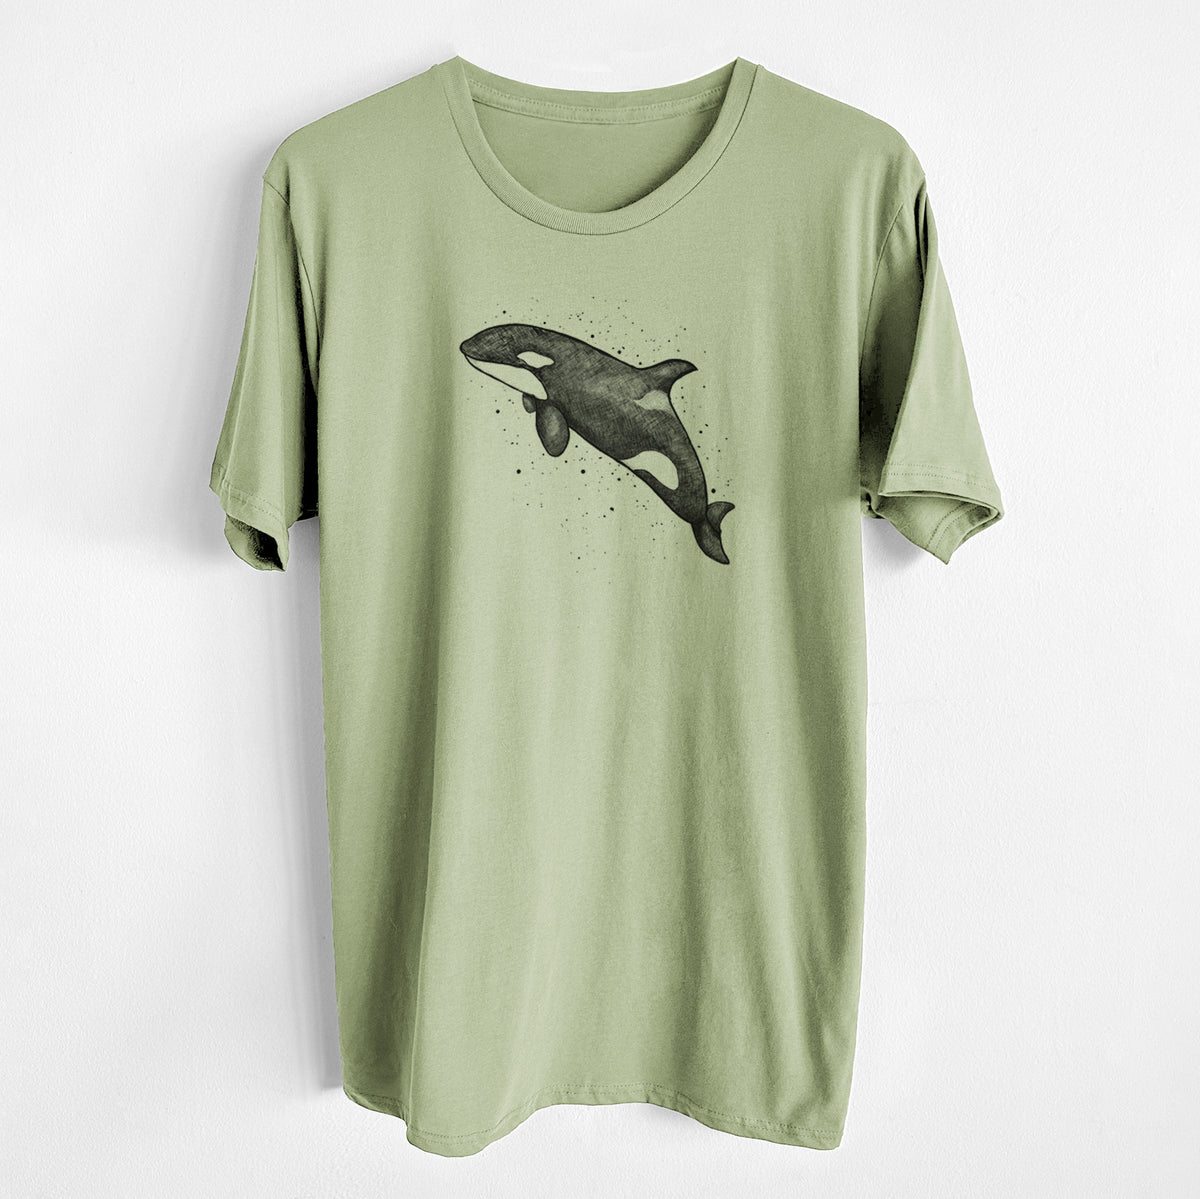 Orca Whale - Unisex Crewneck - Made in USA - 100% Organic Cotton